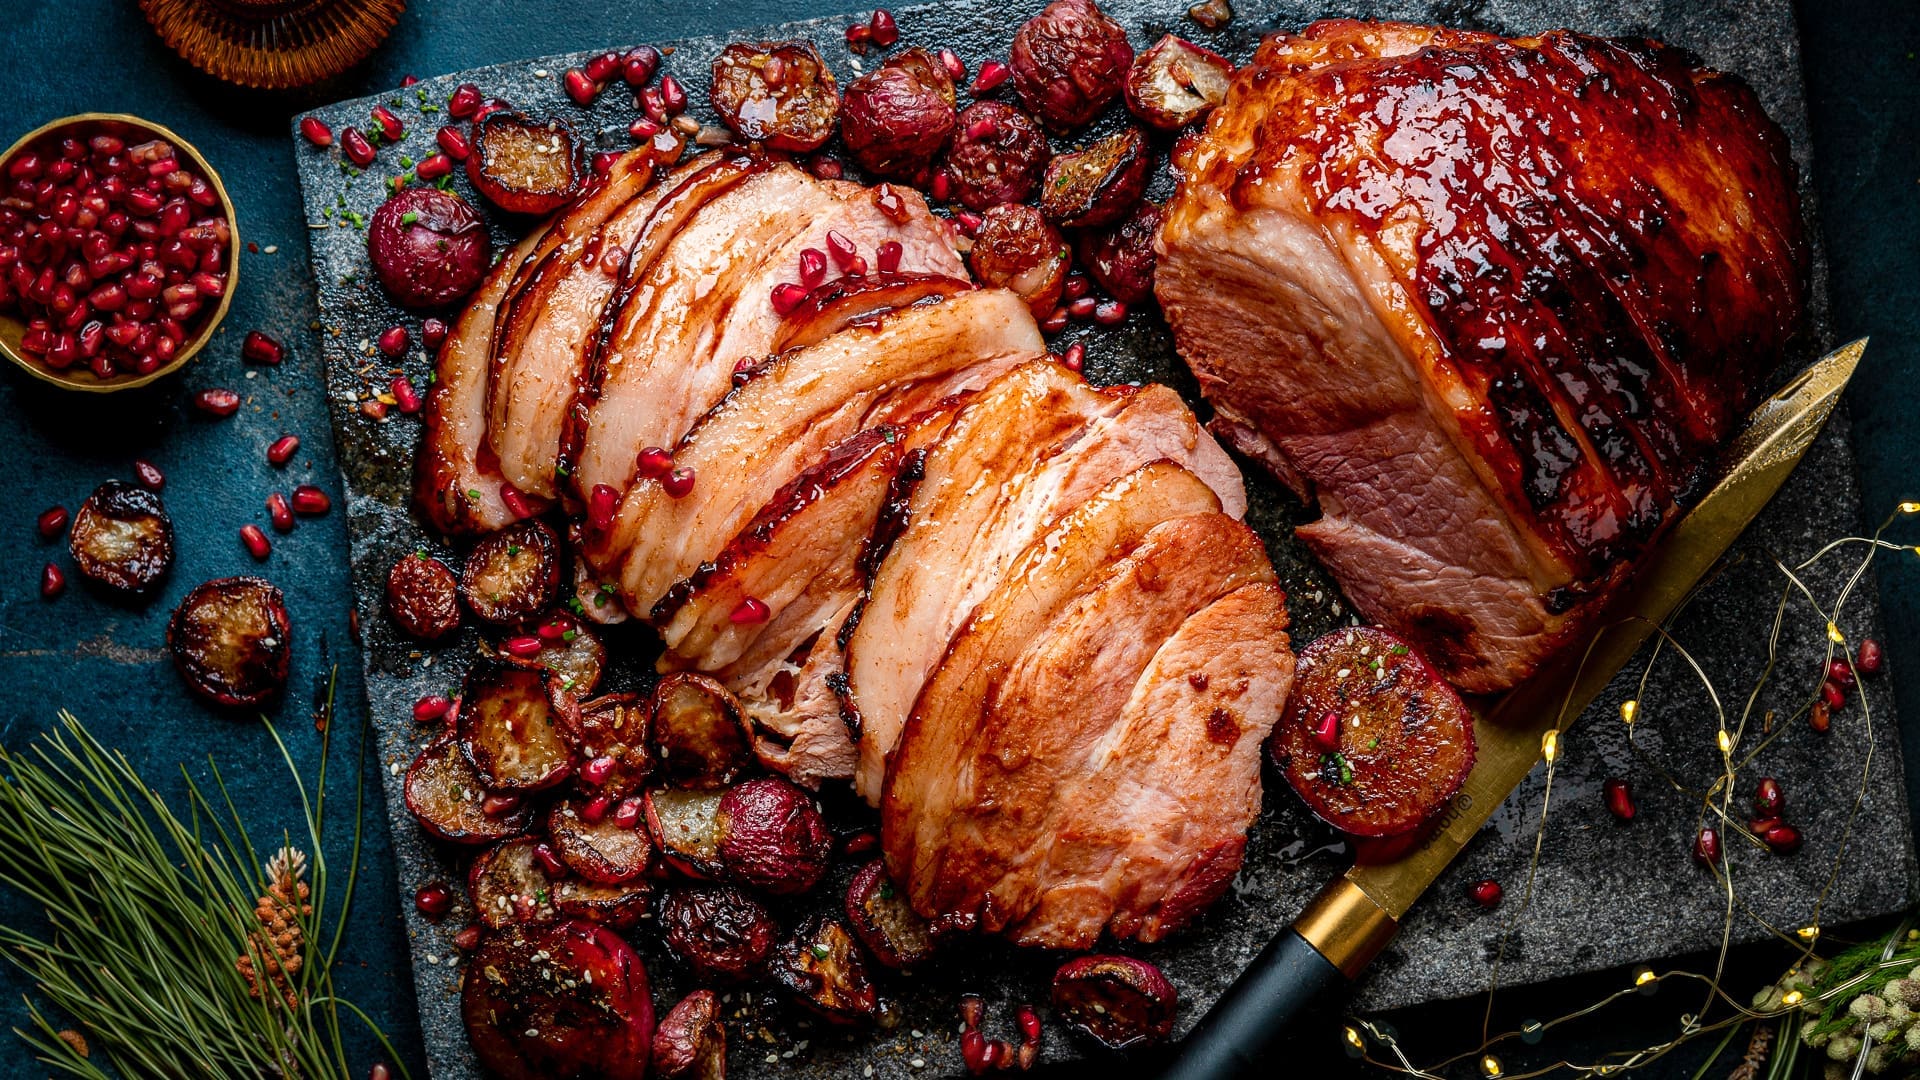 Berry Glazed Gammon with Roasted Vegetables